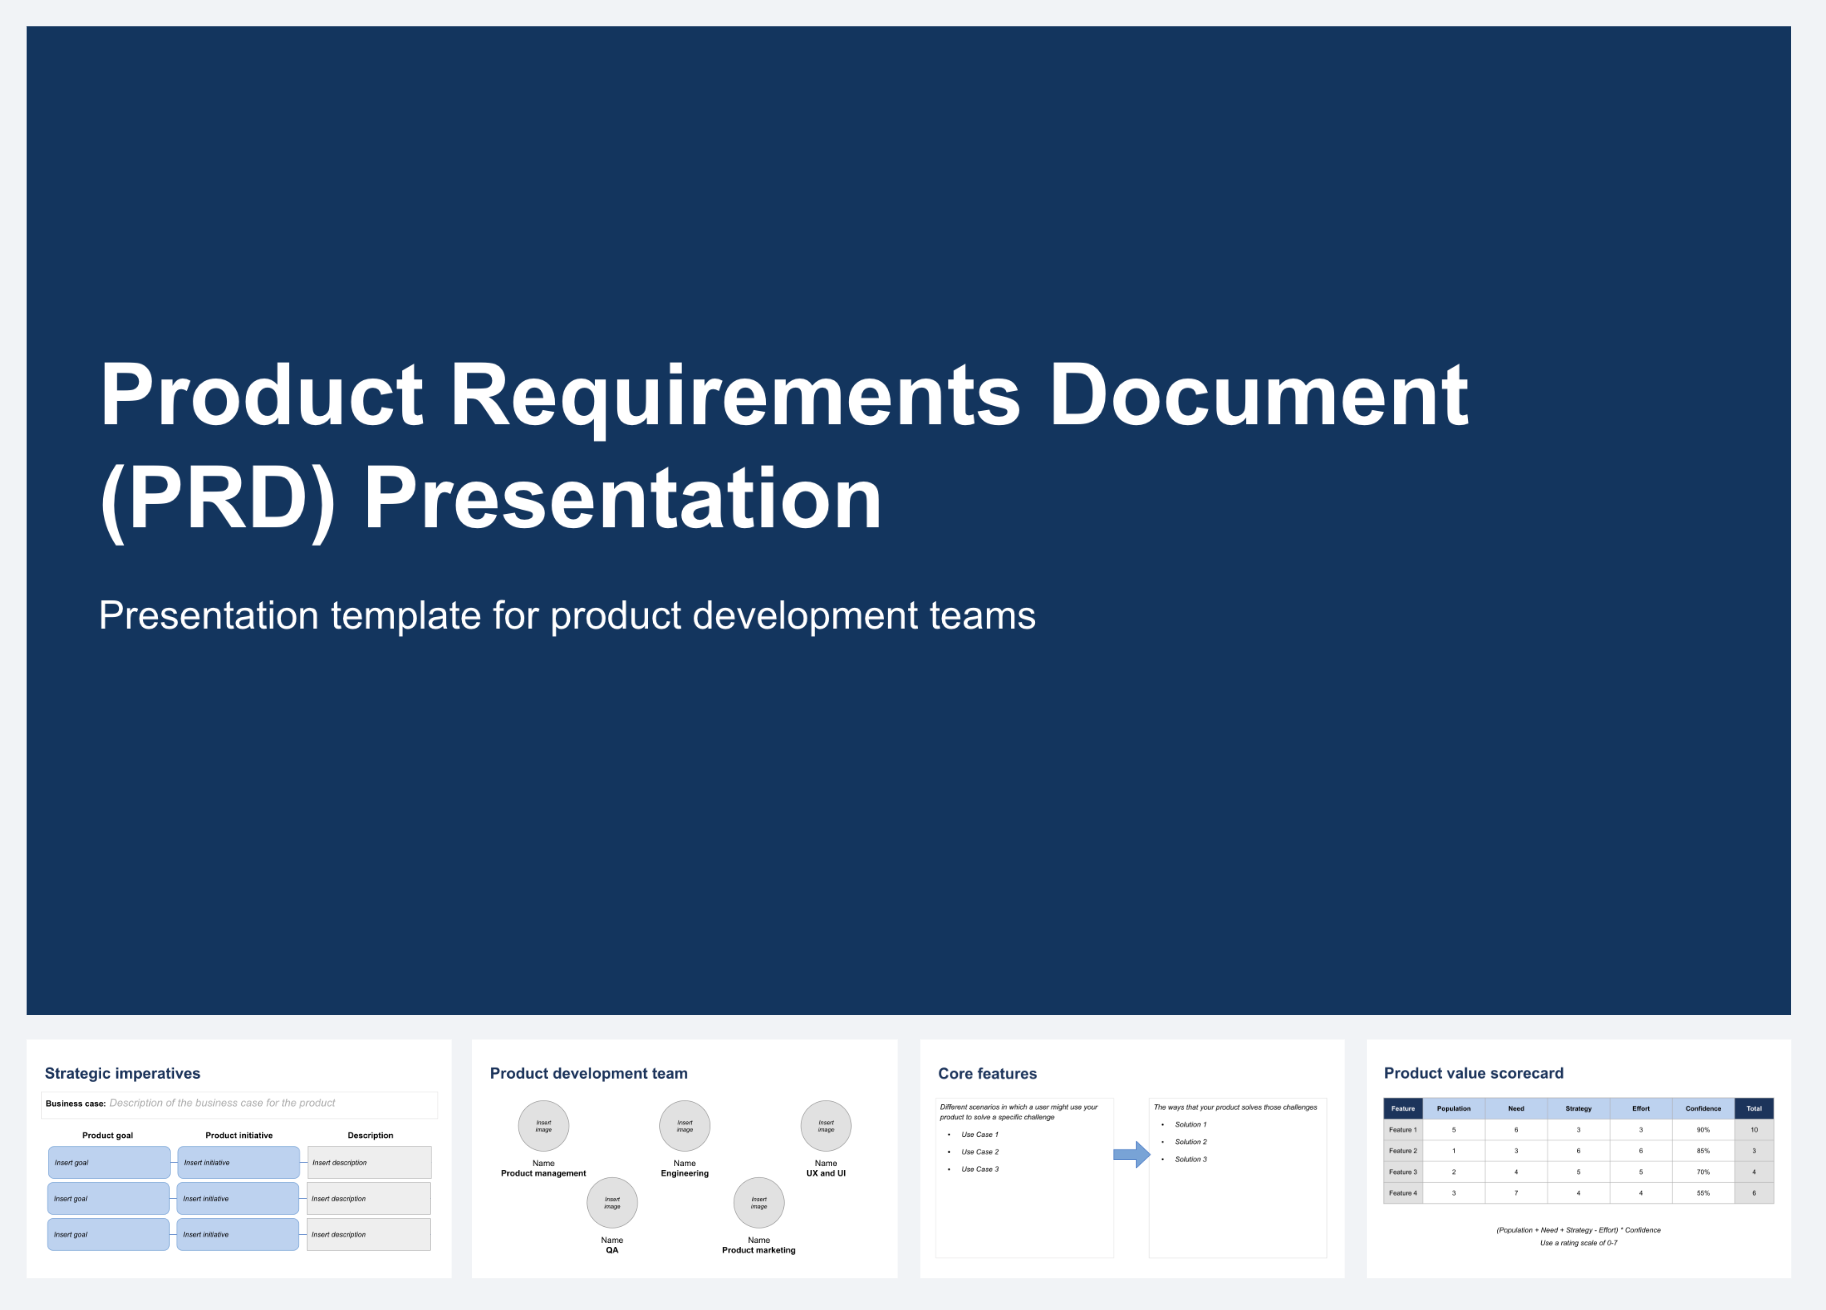 Image / Product Requirements Document (PRD) Presentation Template